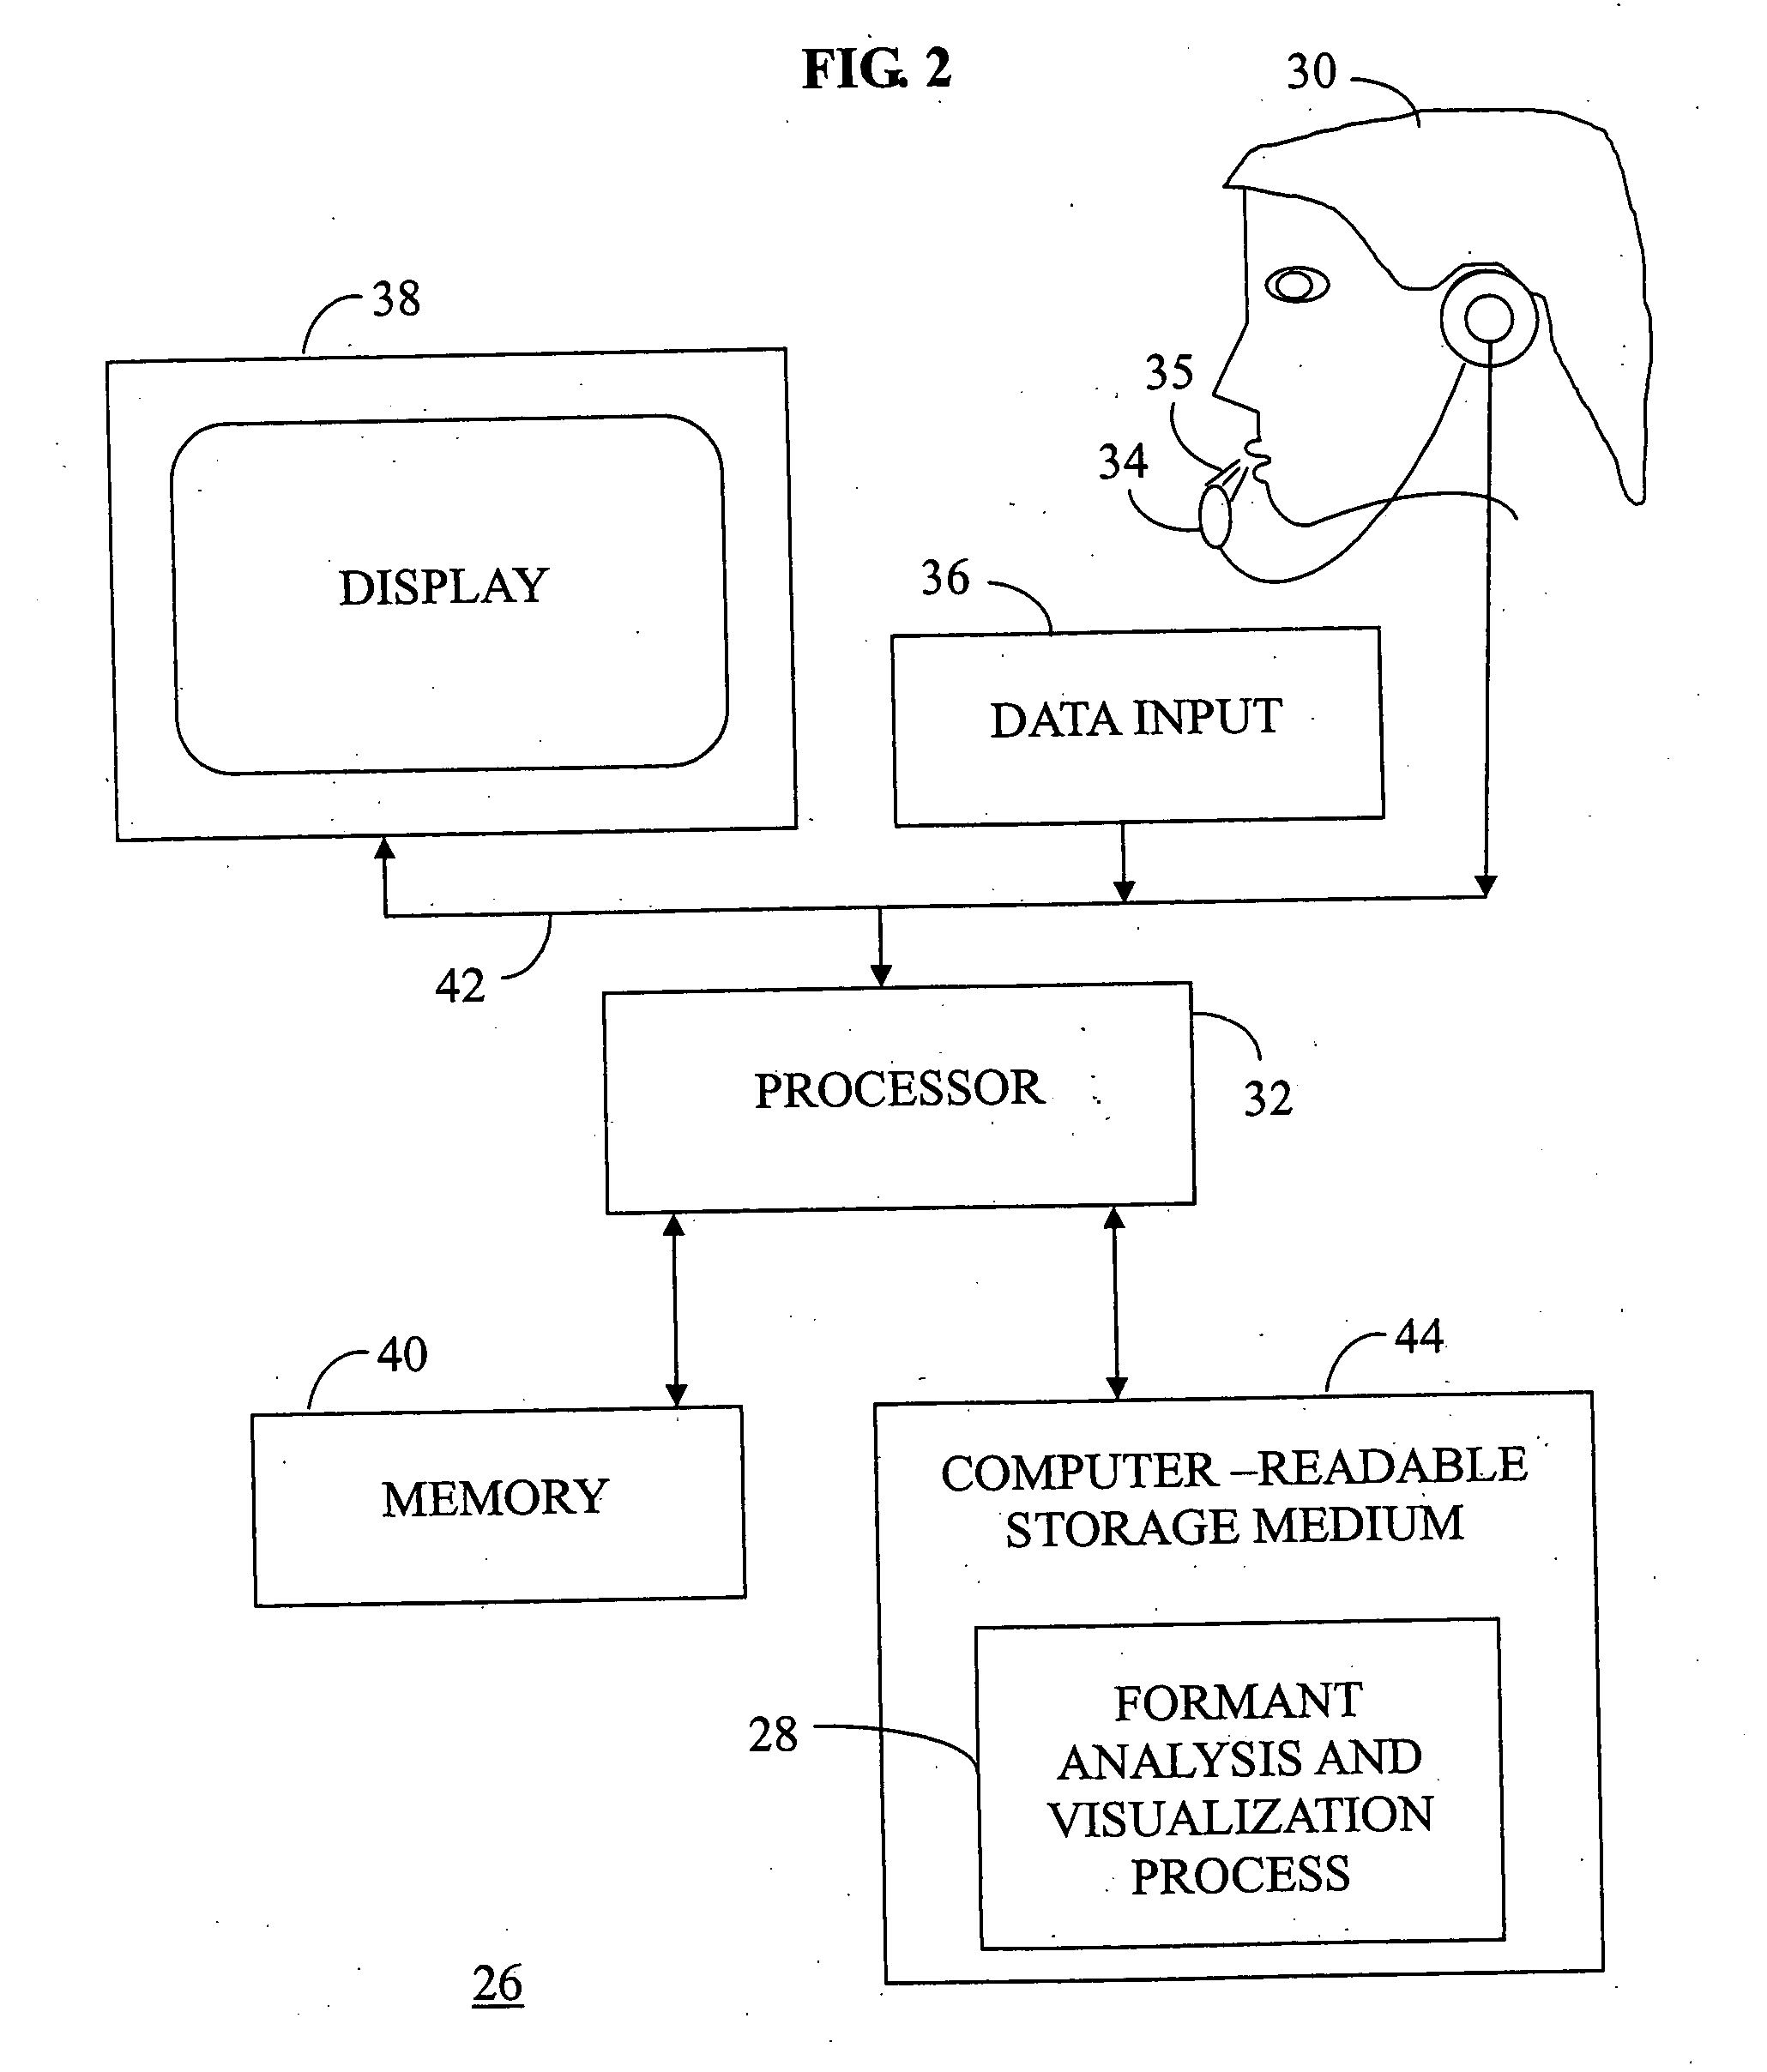 Real time voice analysis and method for providing speech therapy